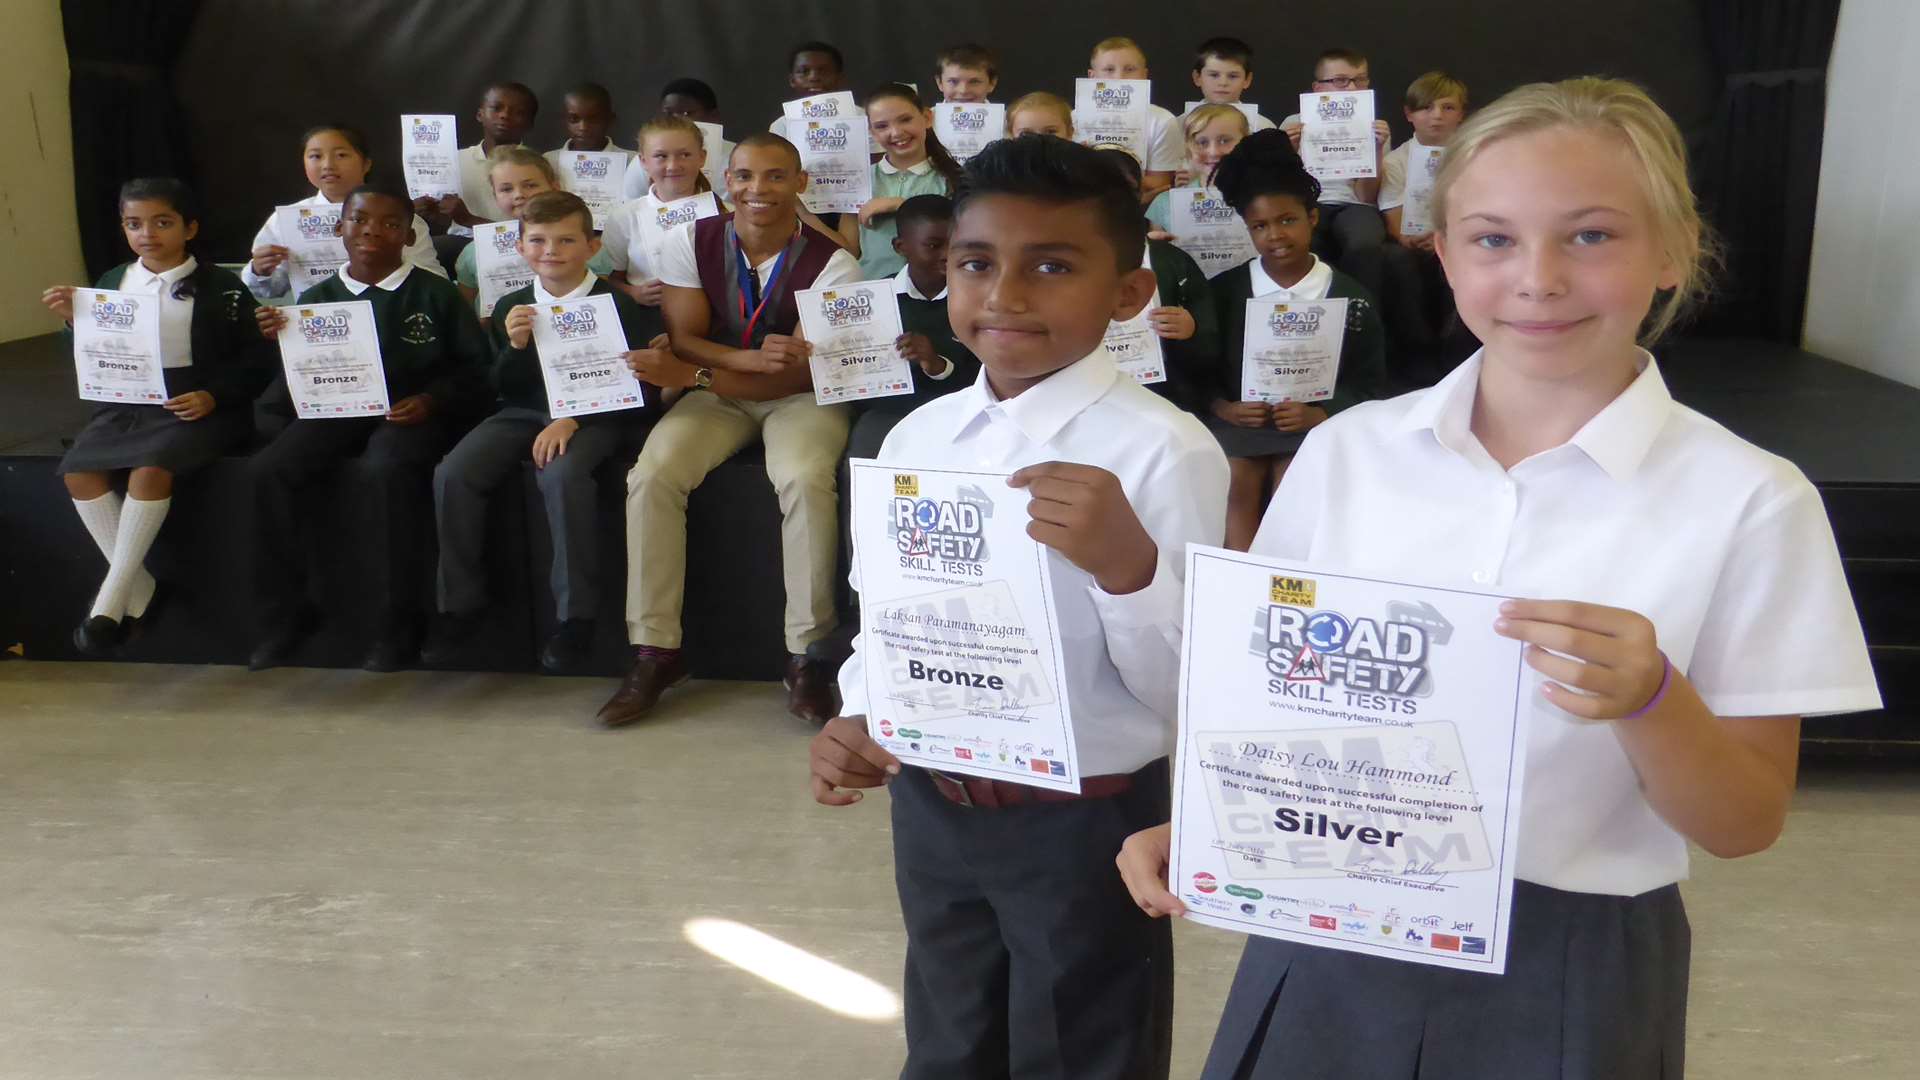 Laksan Paramanayagam and Daisy Lou Hammond and Year 6 pupils from Gravel Hill Primary School, Bexley celebrate passing their road safety skill tests.